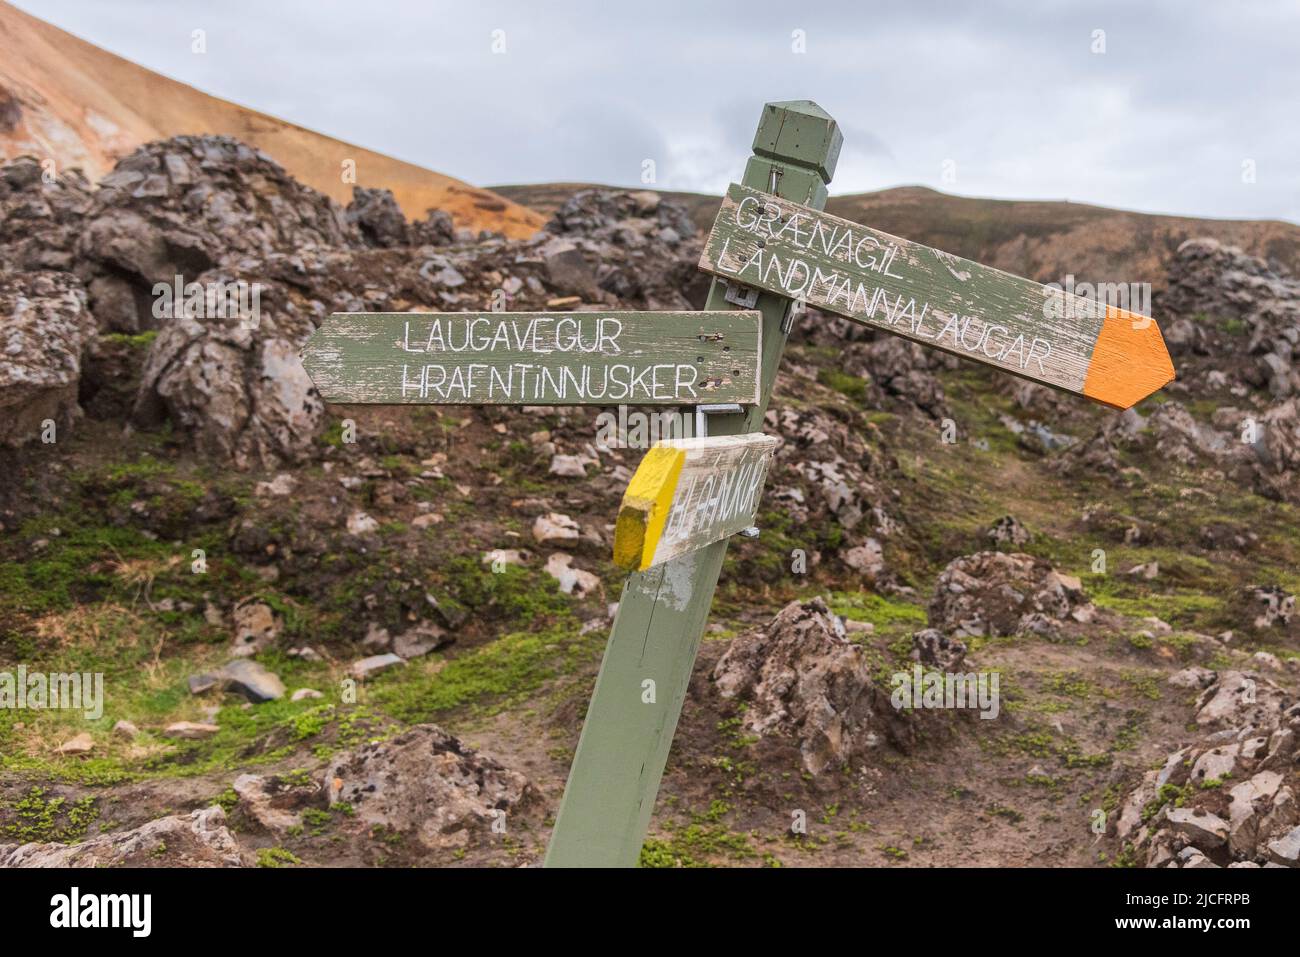 Laugavegur hiking trail is the most famous multi-day trekking tour in Iceland. Landscape photo from the area around Landmannalaugar, starting point of the long-distance hiking trail in the highlands of Iceland. Signpost Hrafntinnusker Grænagil Stock Photo